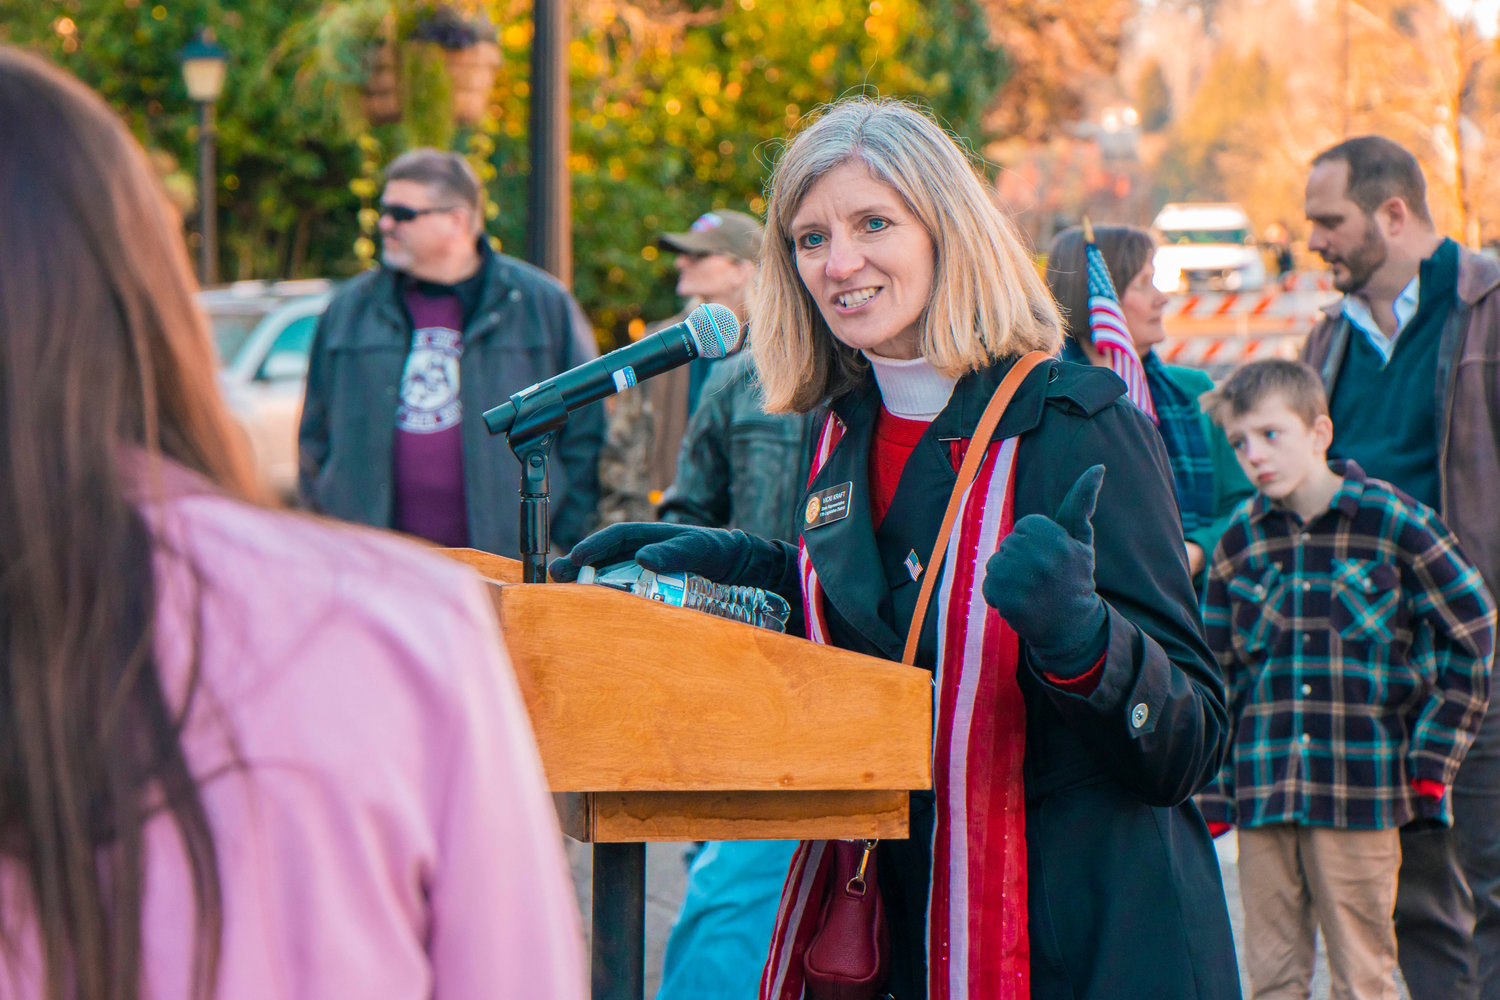 Vicki Kraft introduces a student athlete to speak at the podium during a protest at the Washington State Capitol earlier this year.